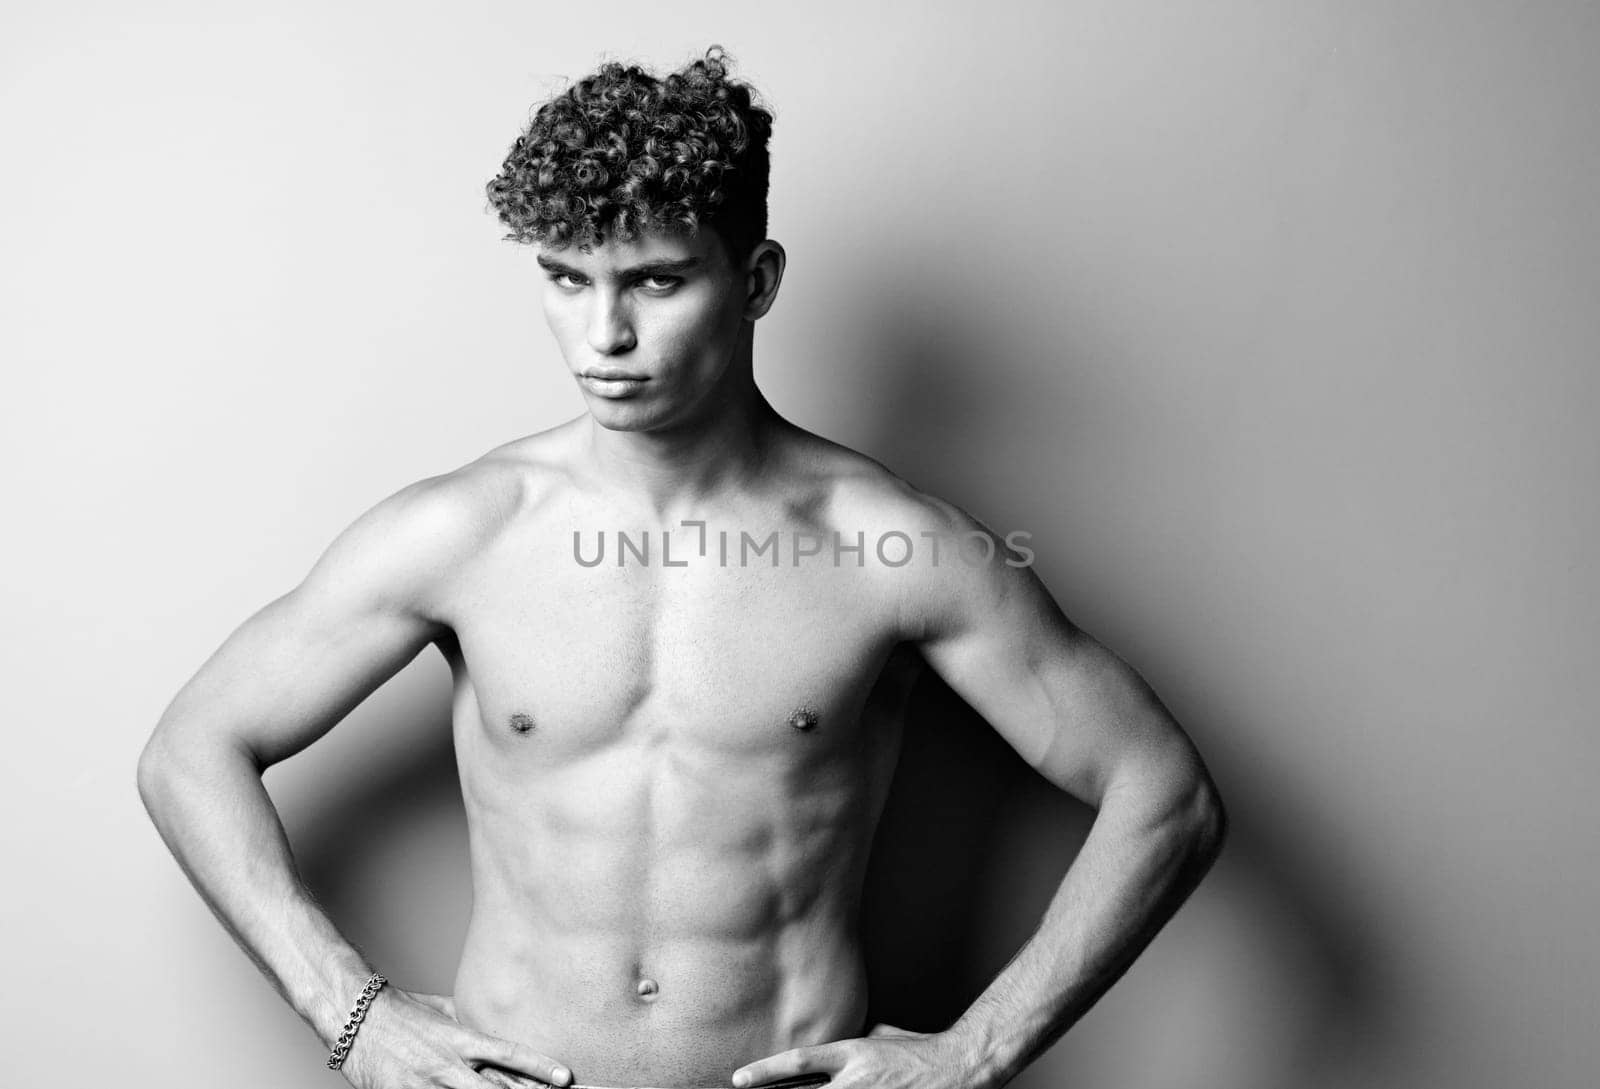 man bodybuilder shirtless caucasian sport athlete stylish beauty young white bodybuilding black and white by SHOTPRIME